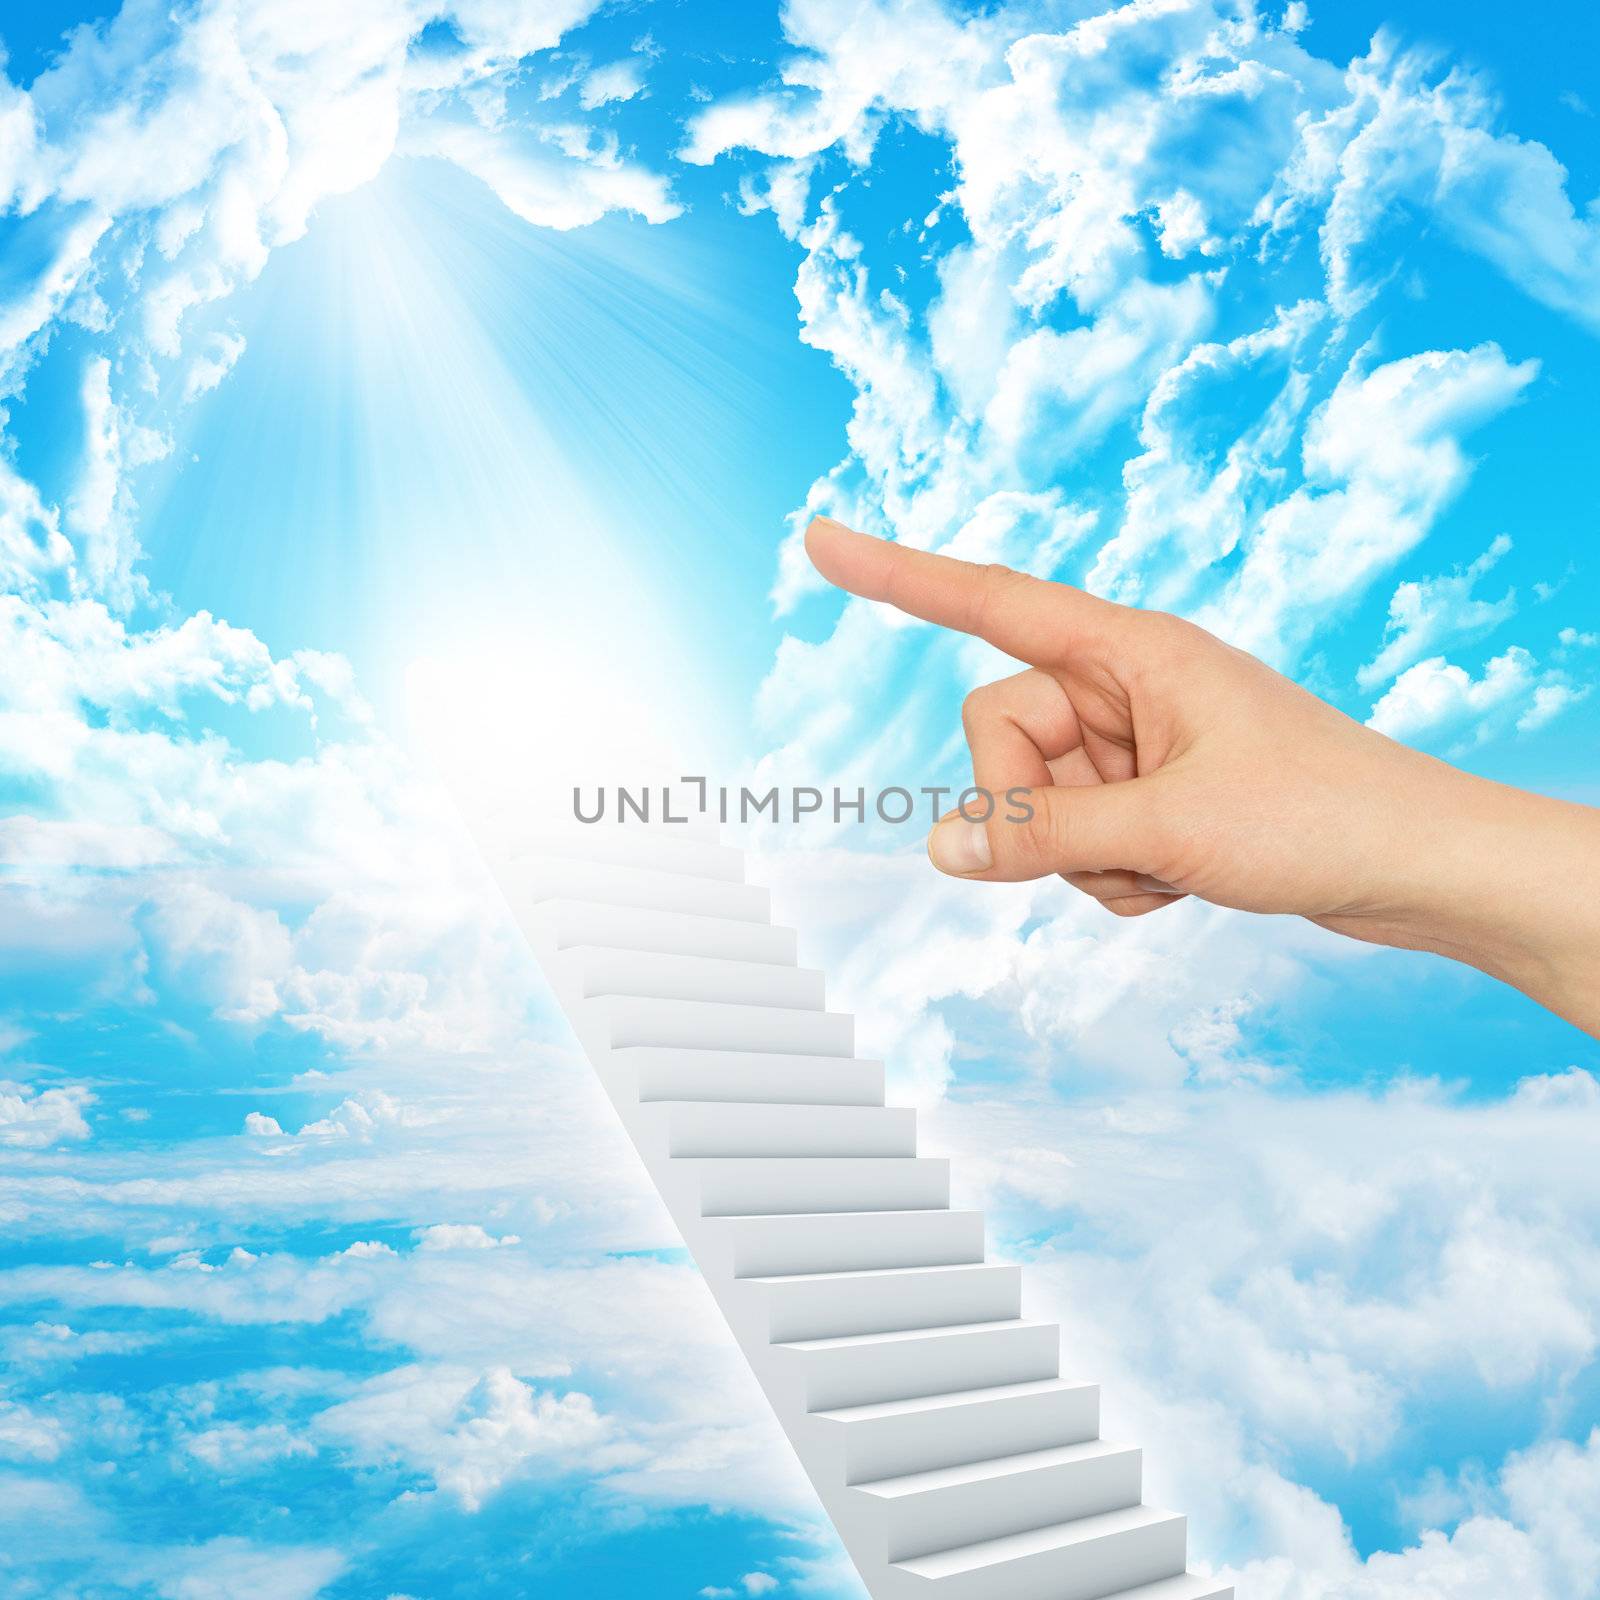 Finger indicates stairway to heaven with clouds and sun. Concept background